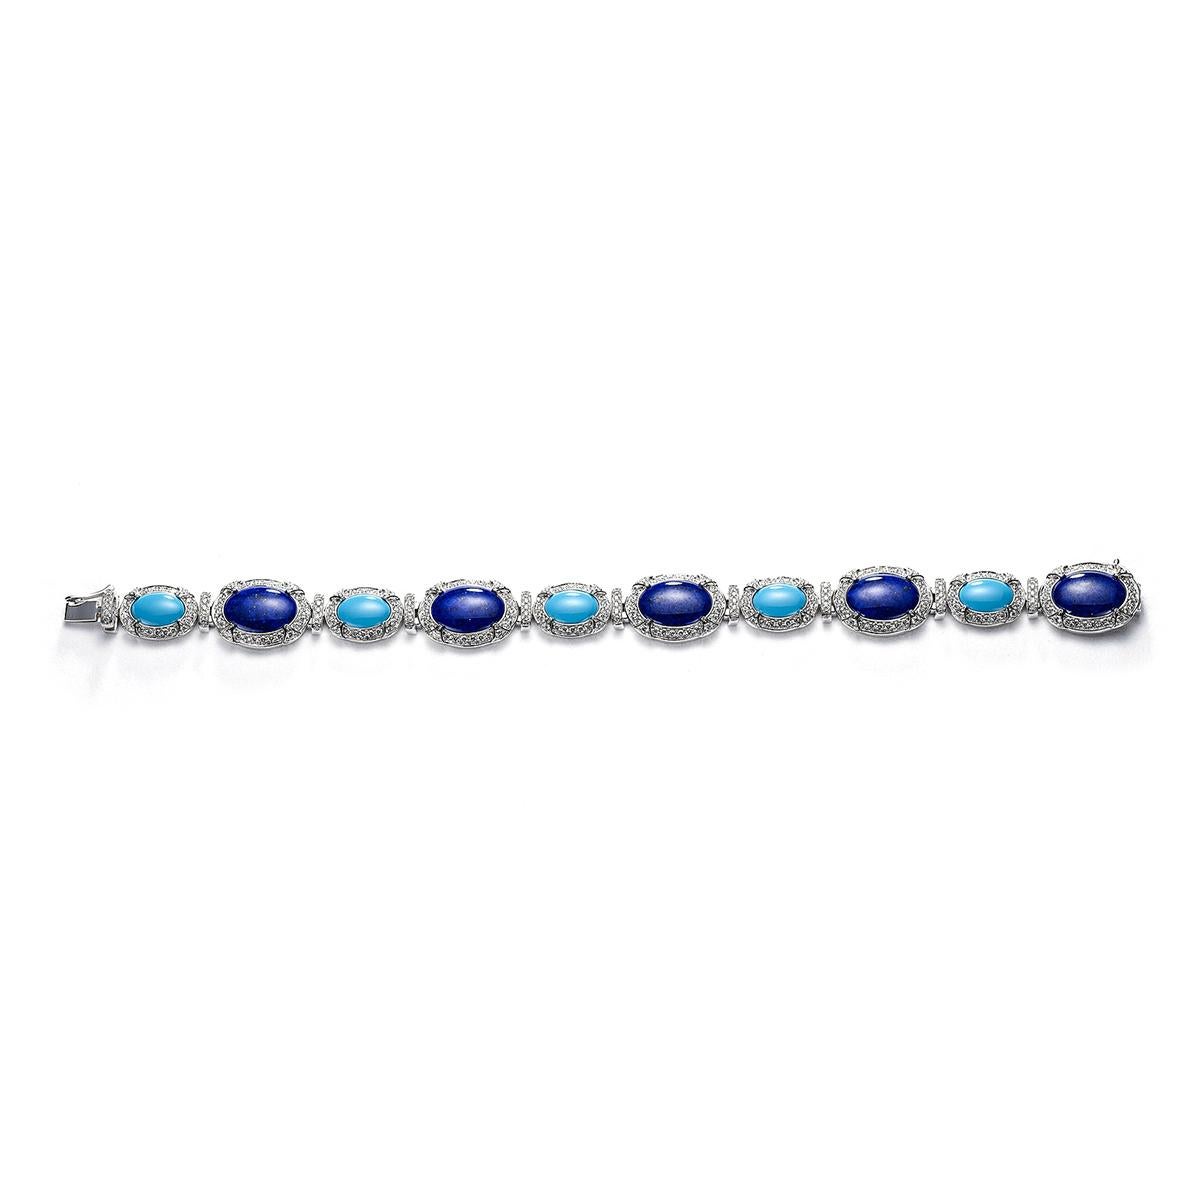 Bracelet in 18kt white gold set with 290 diamonds 2.47 cts, 5 lapis lazuli 9.54 cts and 5 turquoises 2.39 cts        